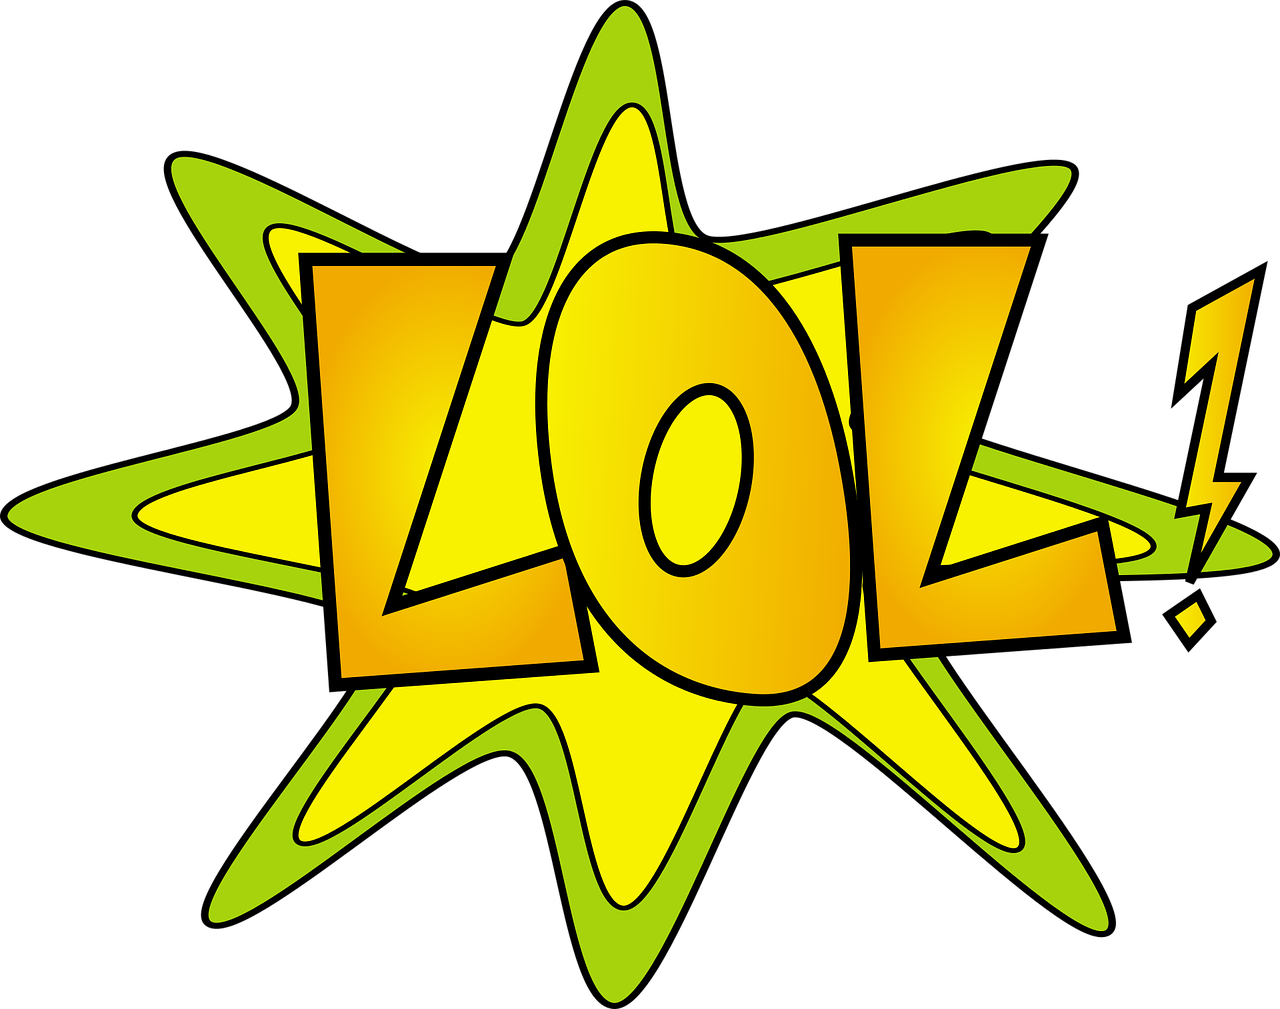 A Yellow And Green Star With Text